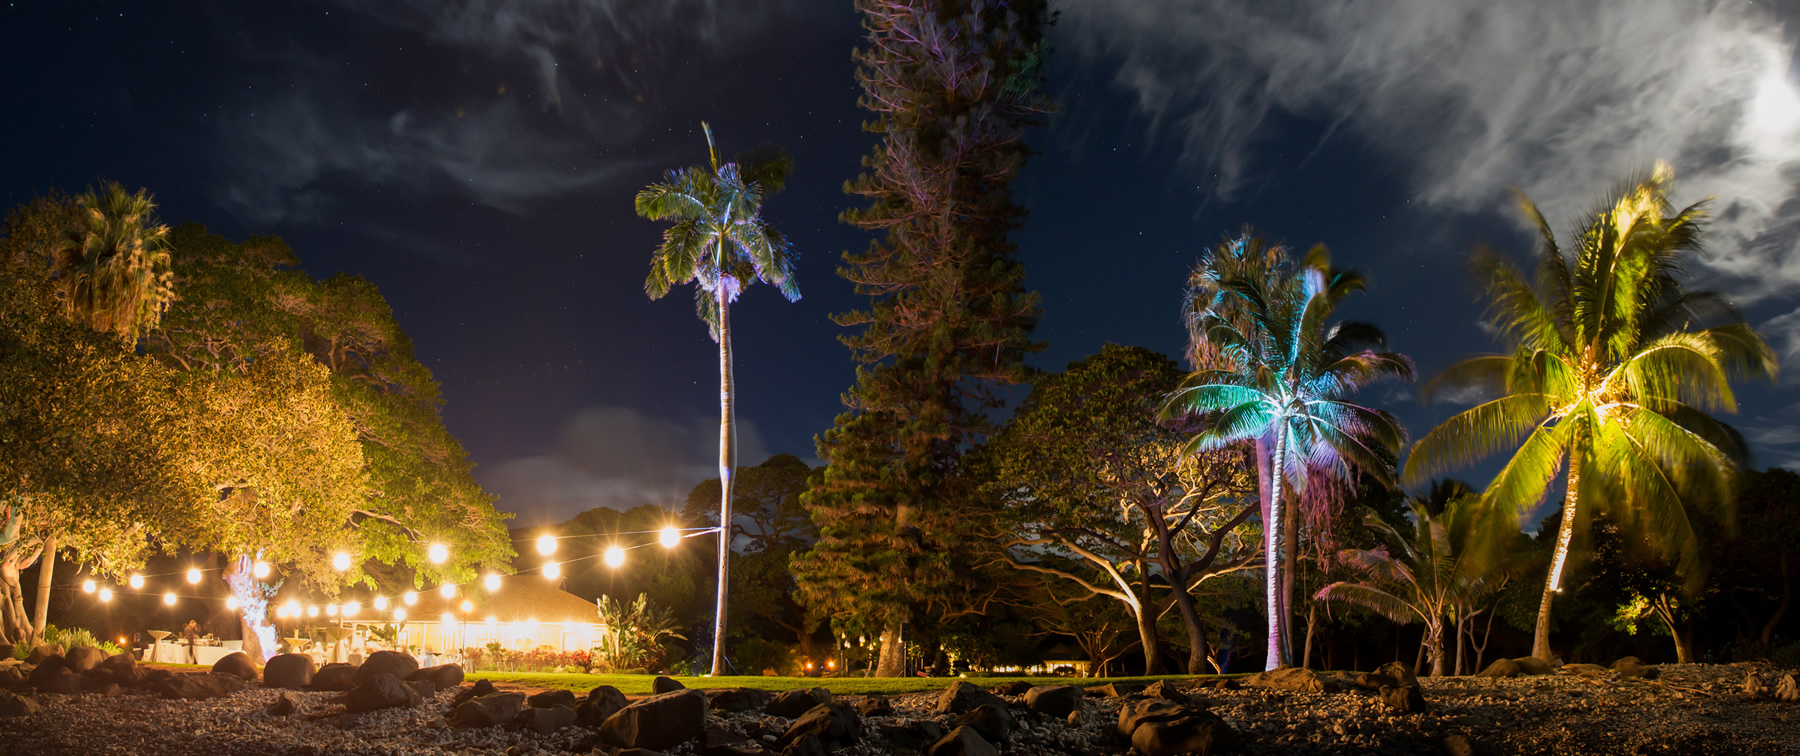 A Maui wedding reception site lit up colorfully at night under a full moon.